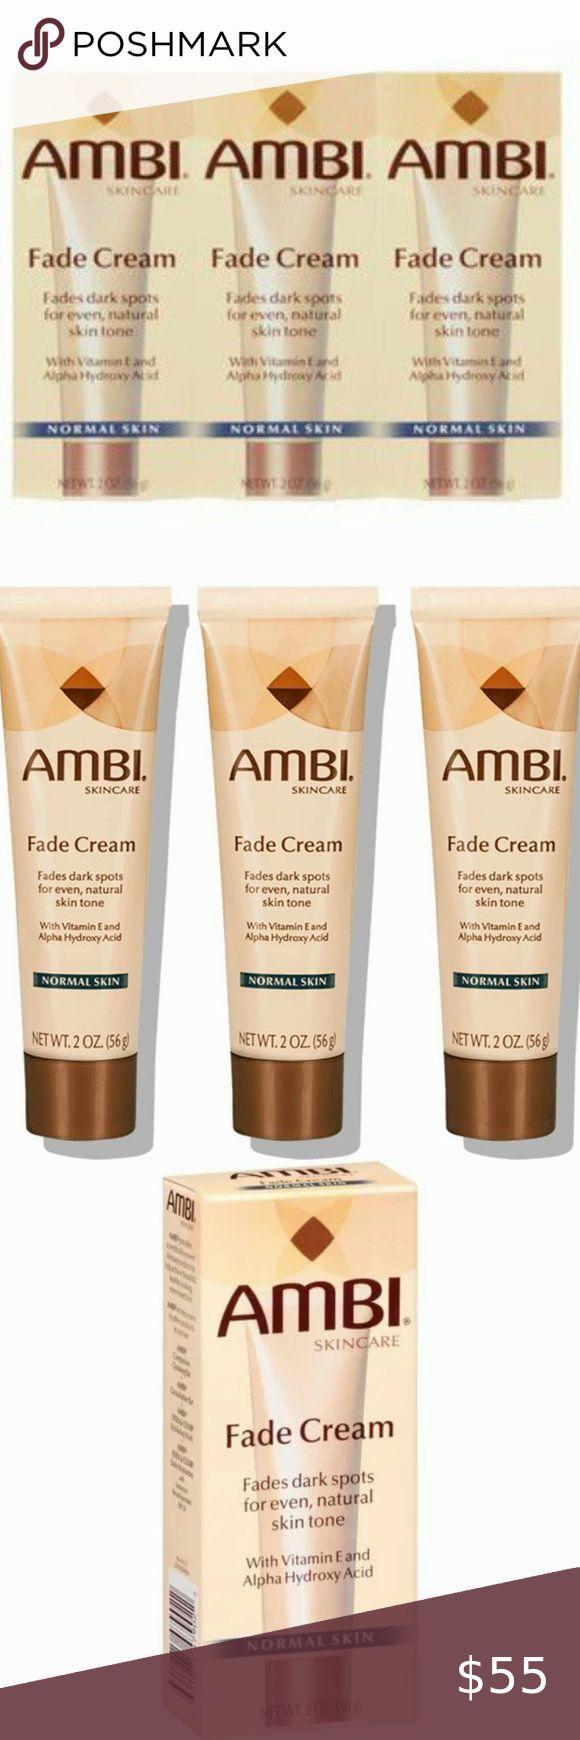 A lineup of six tubes of Ambi Fade Cream, which is used to fade dark spots on the skin.